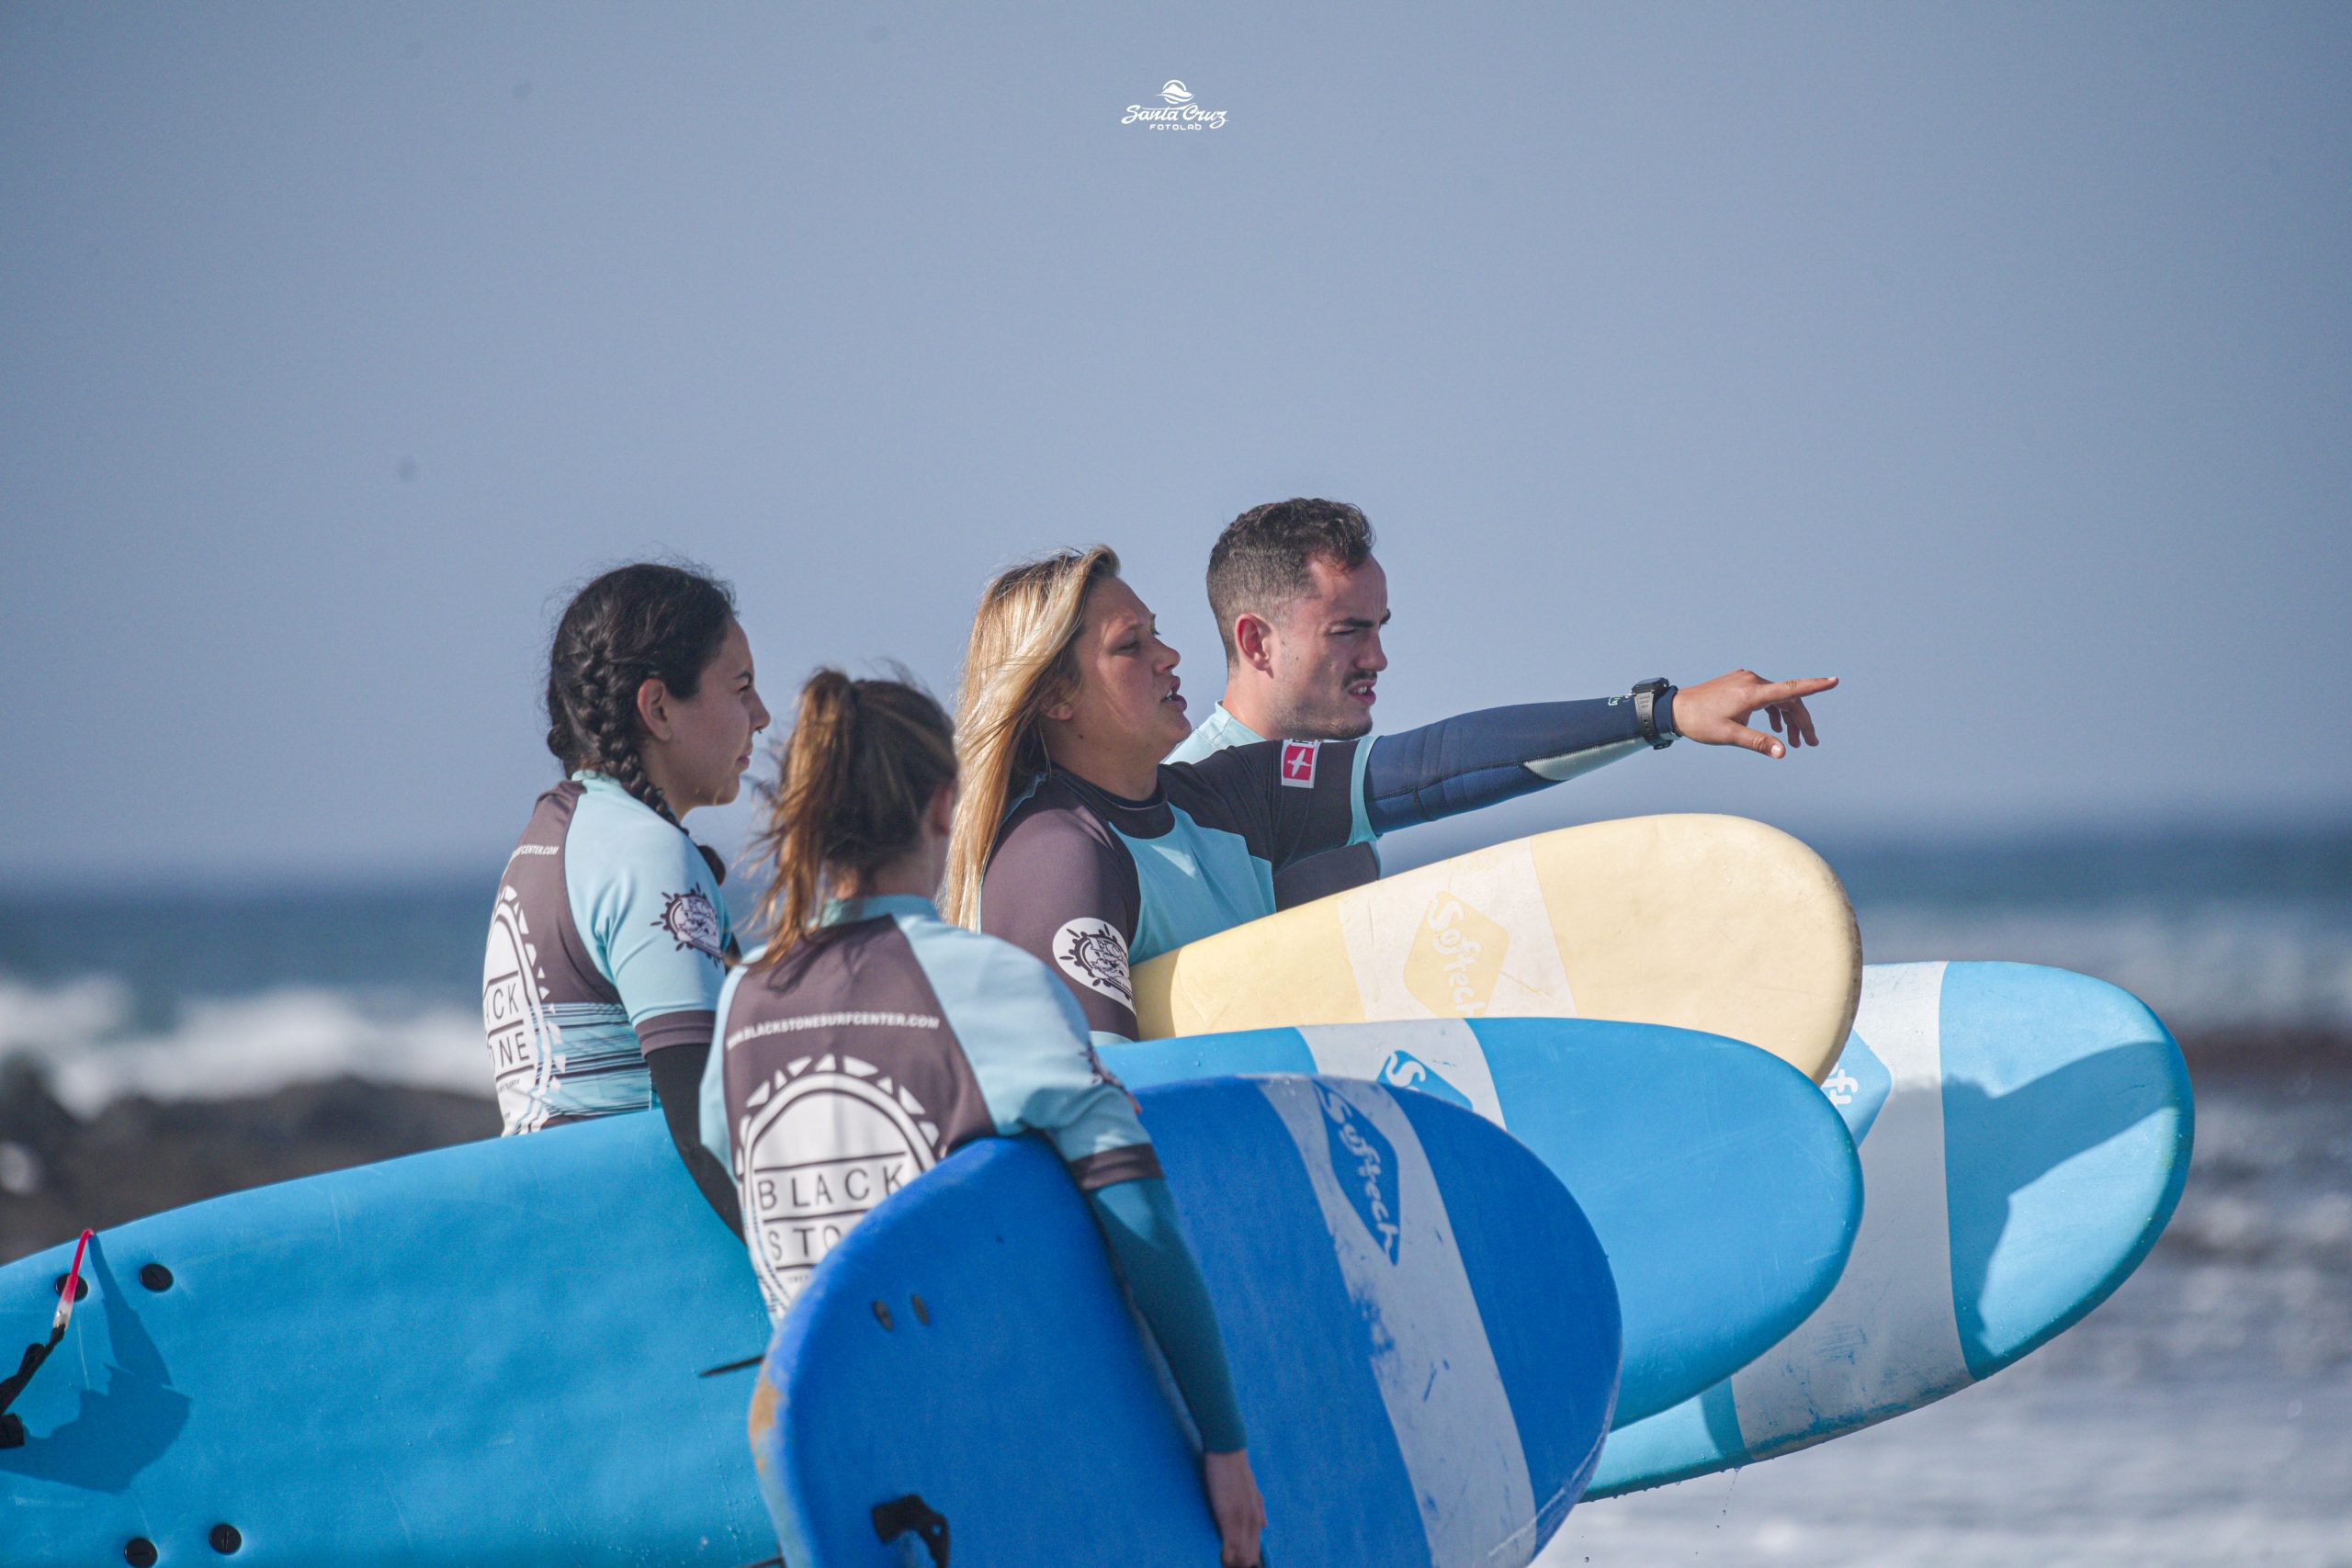 Blackstone Surf Center group of students with woman instructor in Playa las Américas in Tenerife before a surf lesson